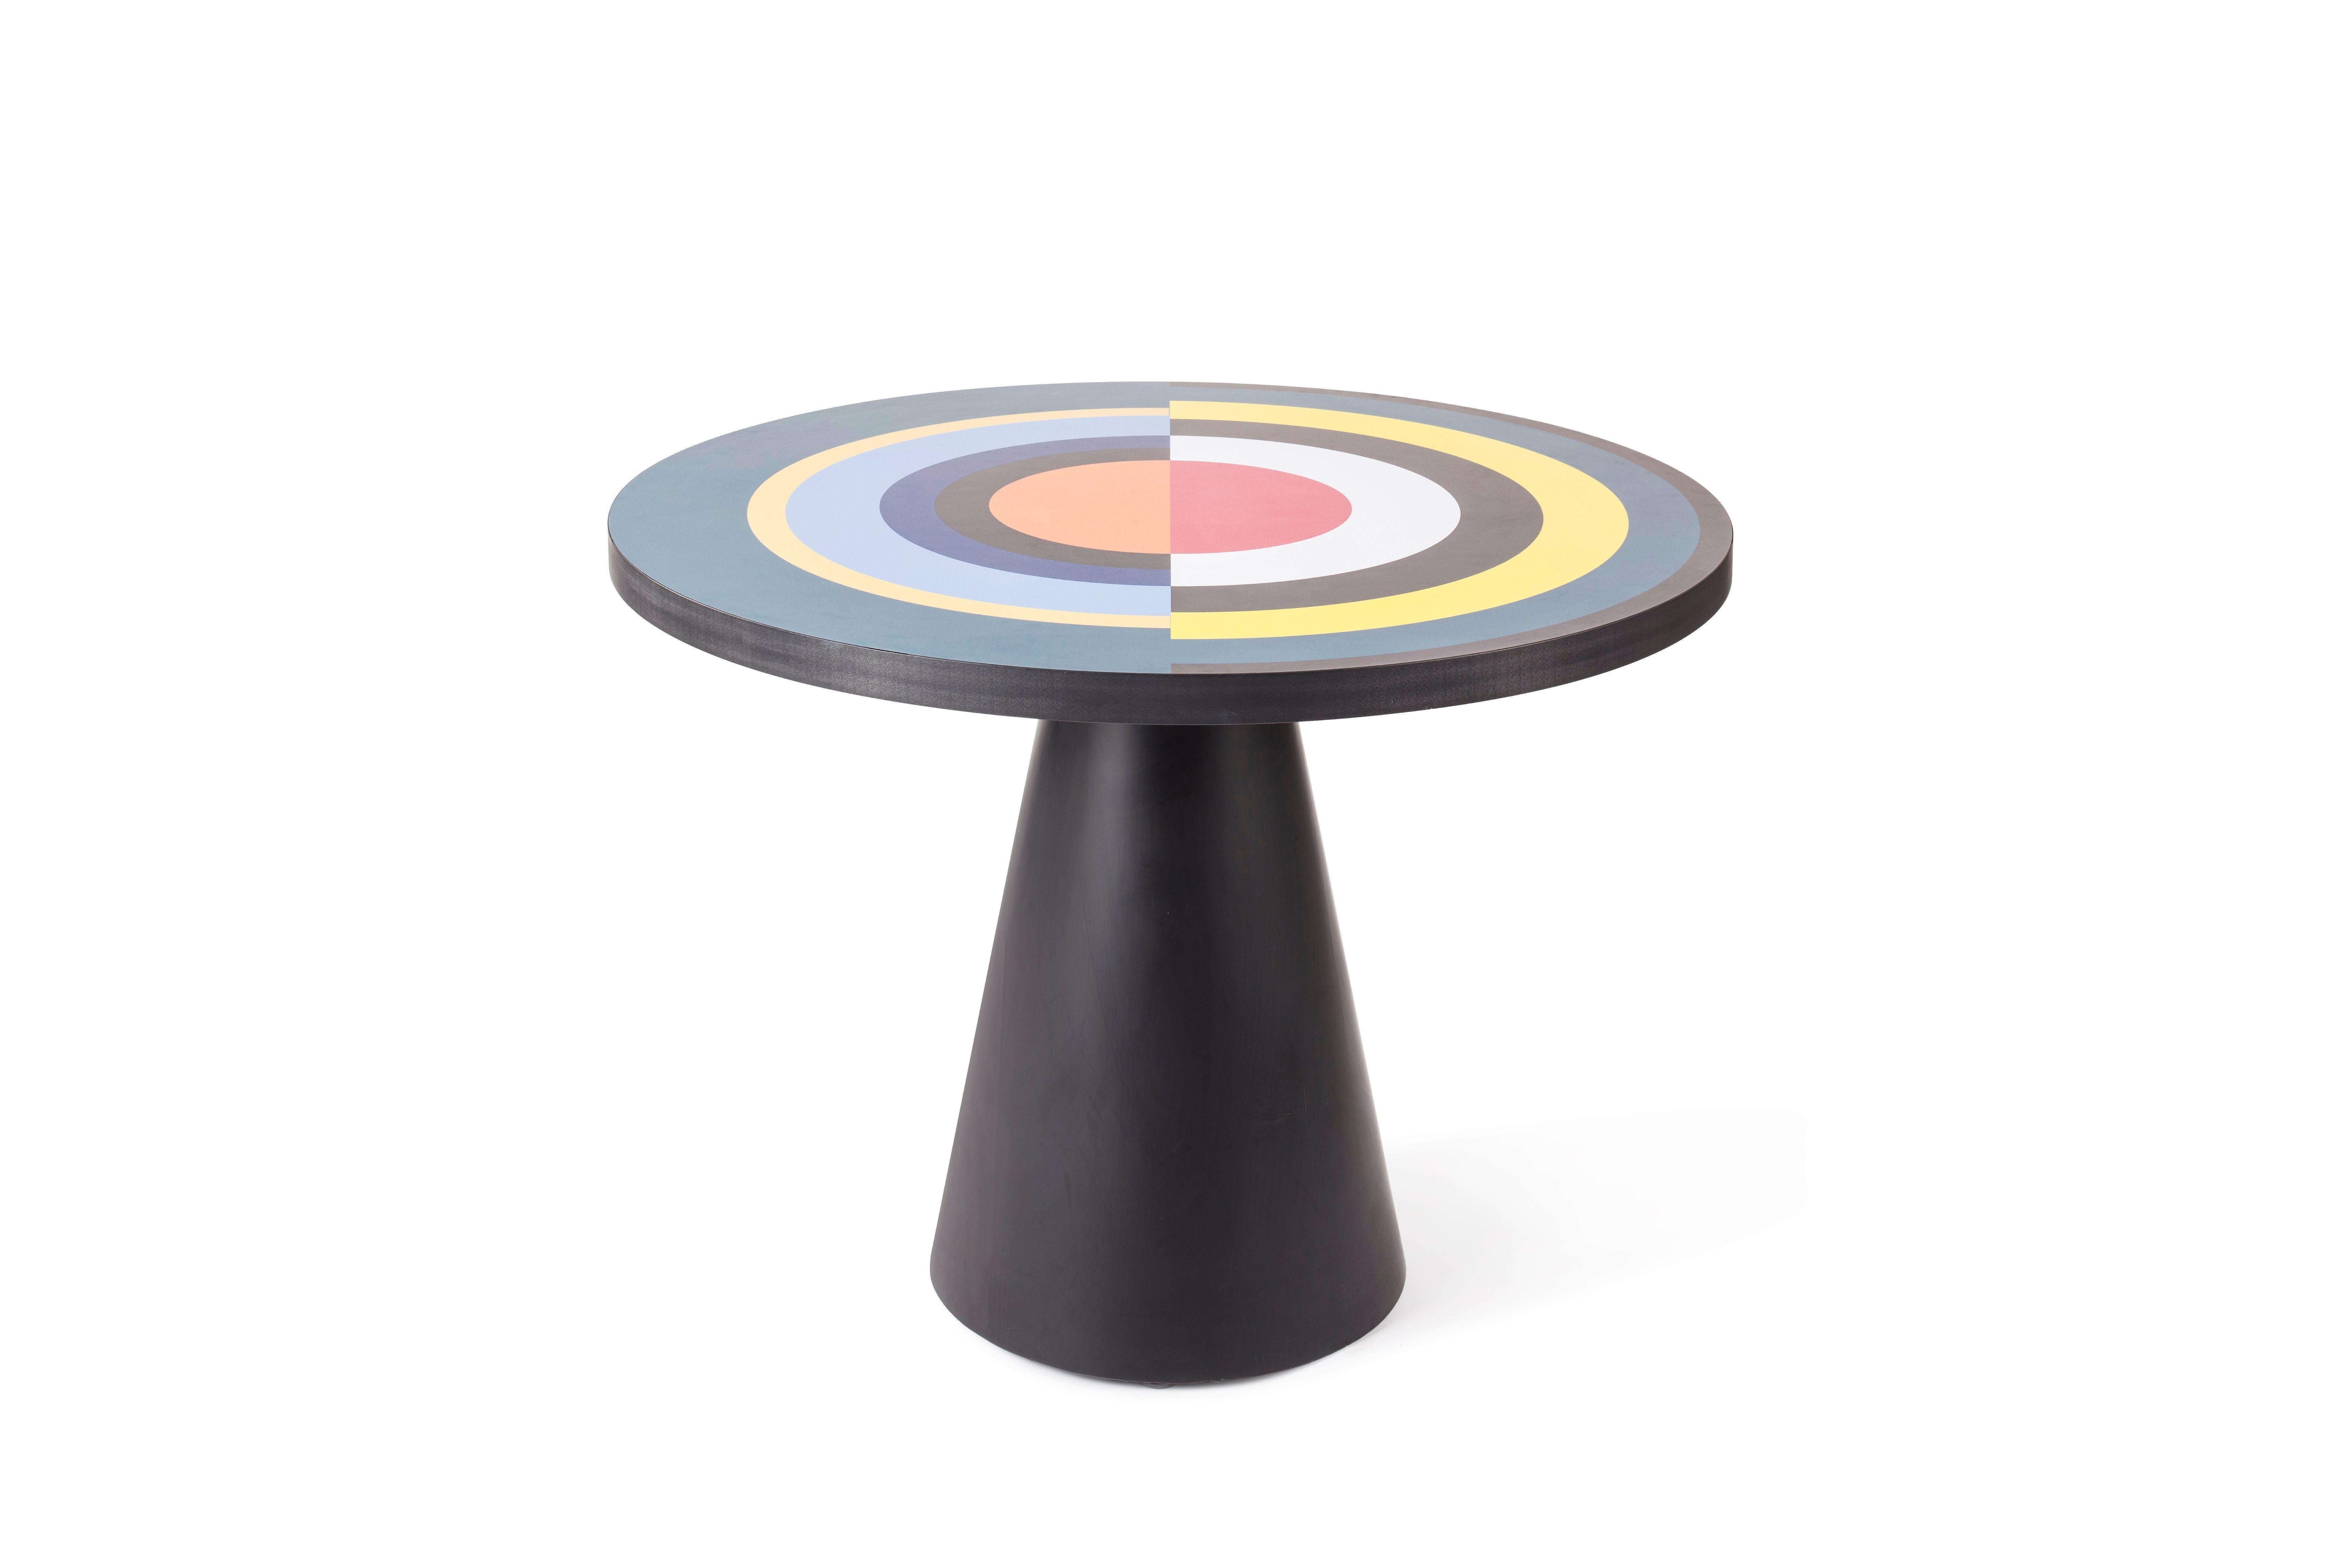 Homage to Delaunay dining table by Thomas Dariel, Maison Dada
Measures: Diametr 80 or diameter 100 or diameter 115 x height 74 cm
Structure in MDF • Base painted in matte color finish
Printed laminate top
Sonia et Cætera pays homage to the famous